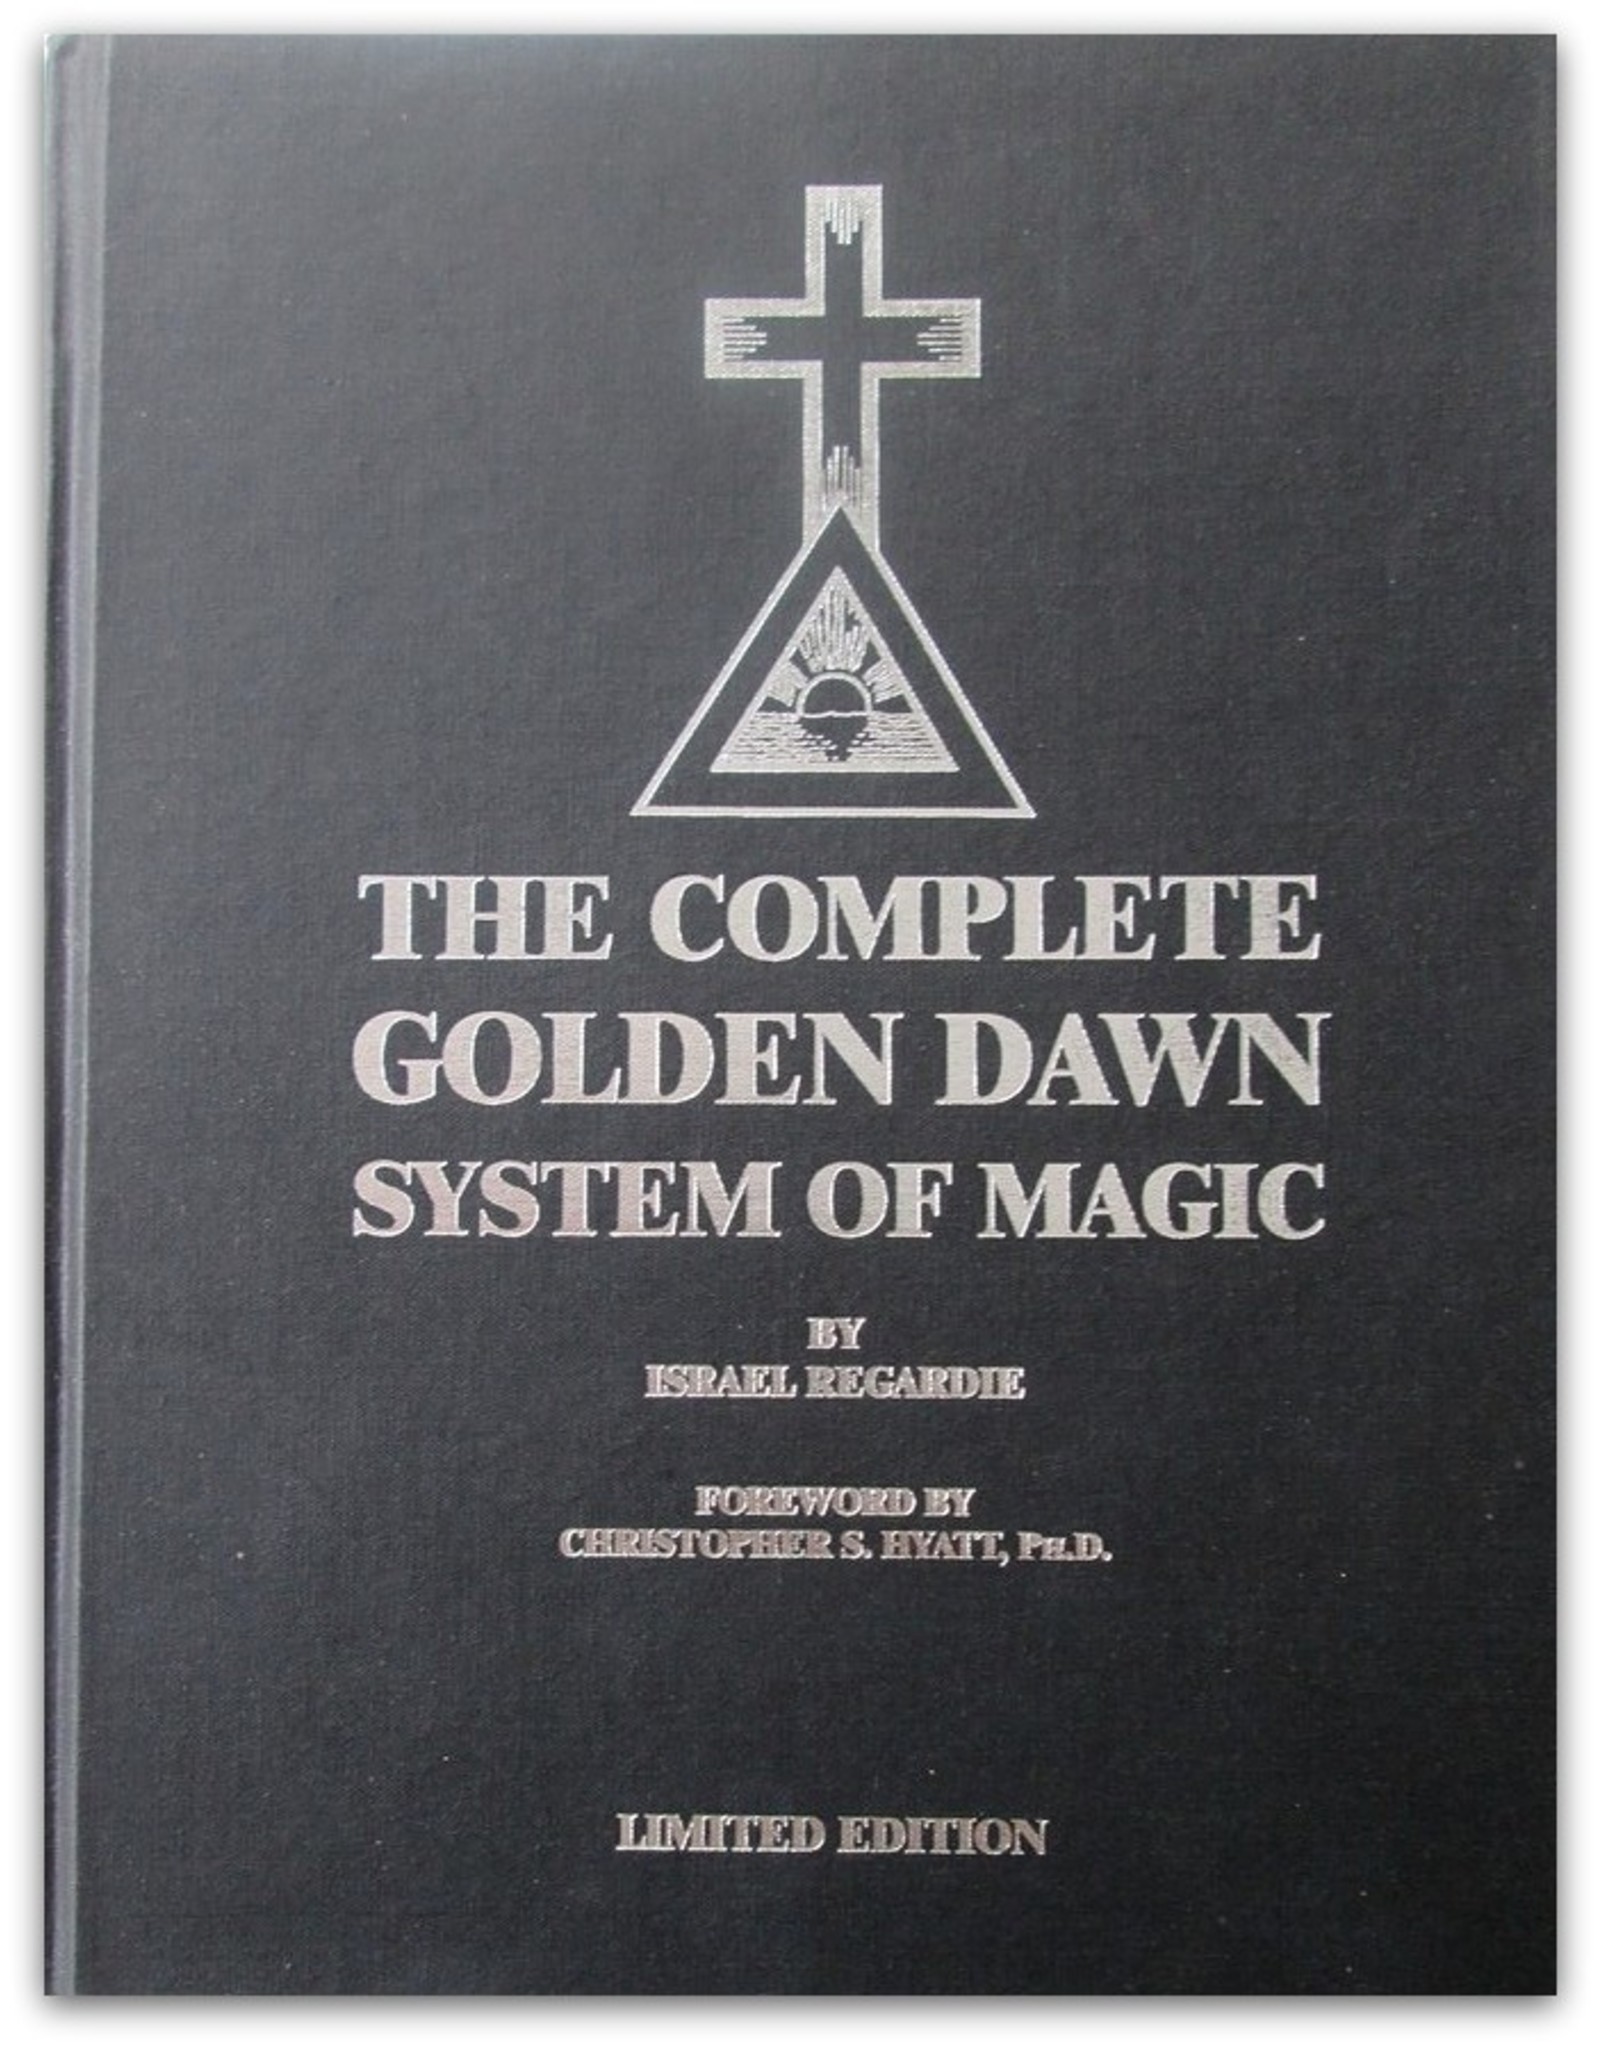 Israel Regardie - The Complete Golden Dawn System of Magic - 2003 